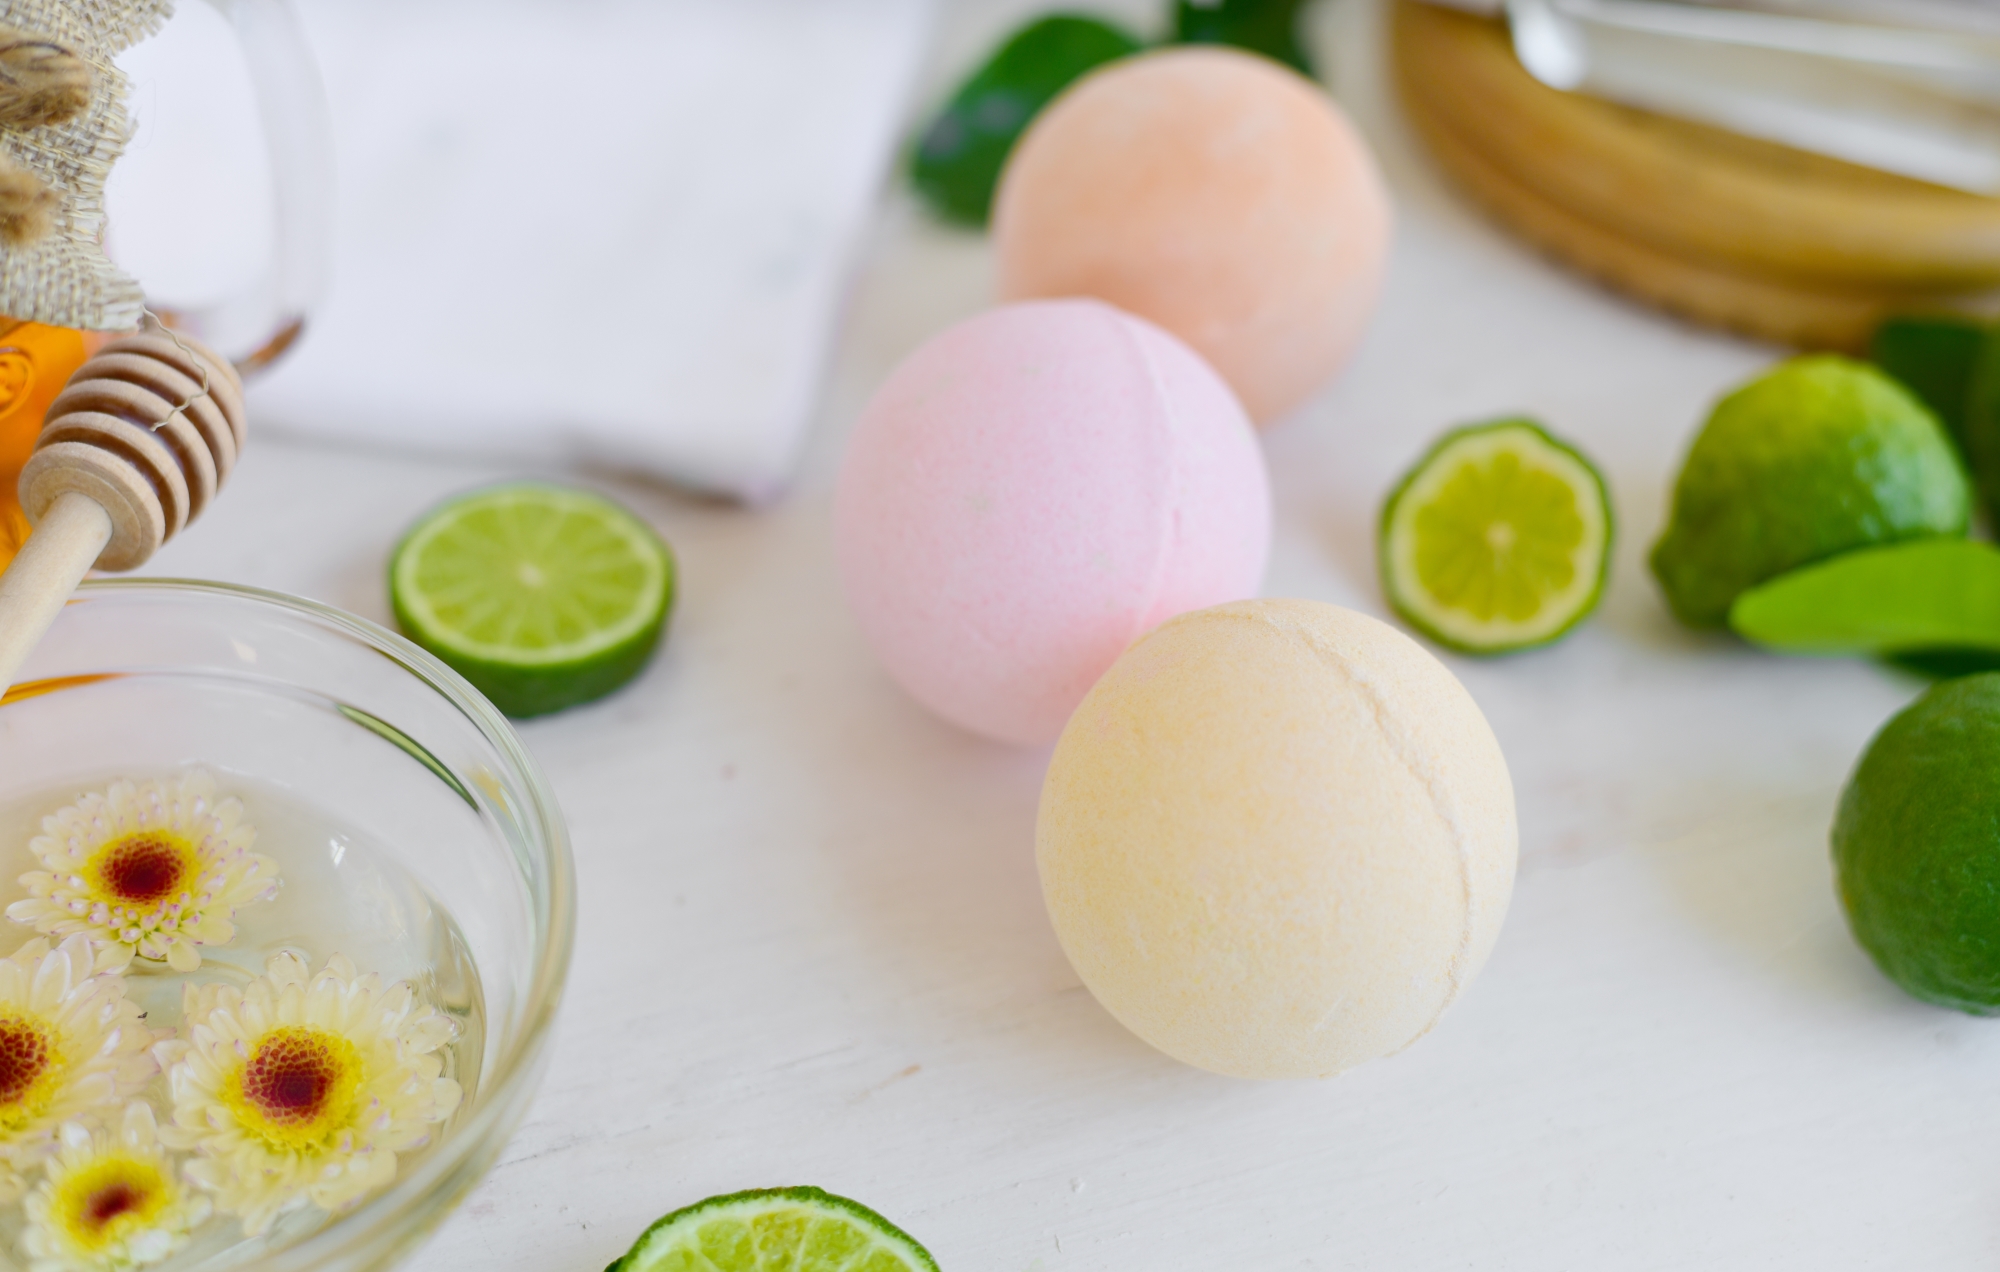 image of drink bombs and limes on a kitchen counter